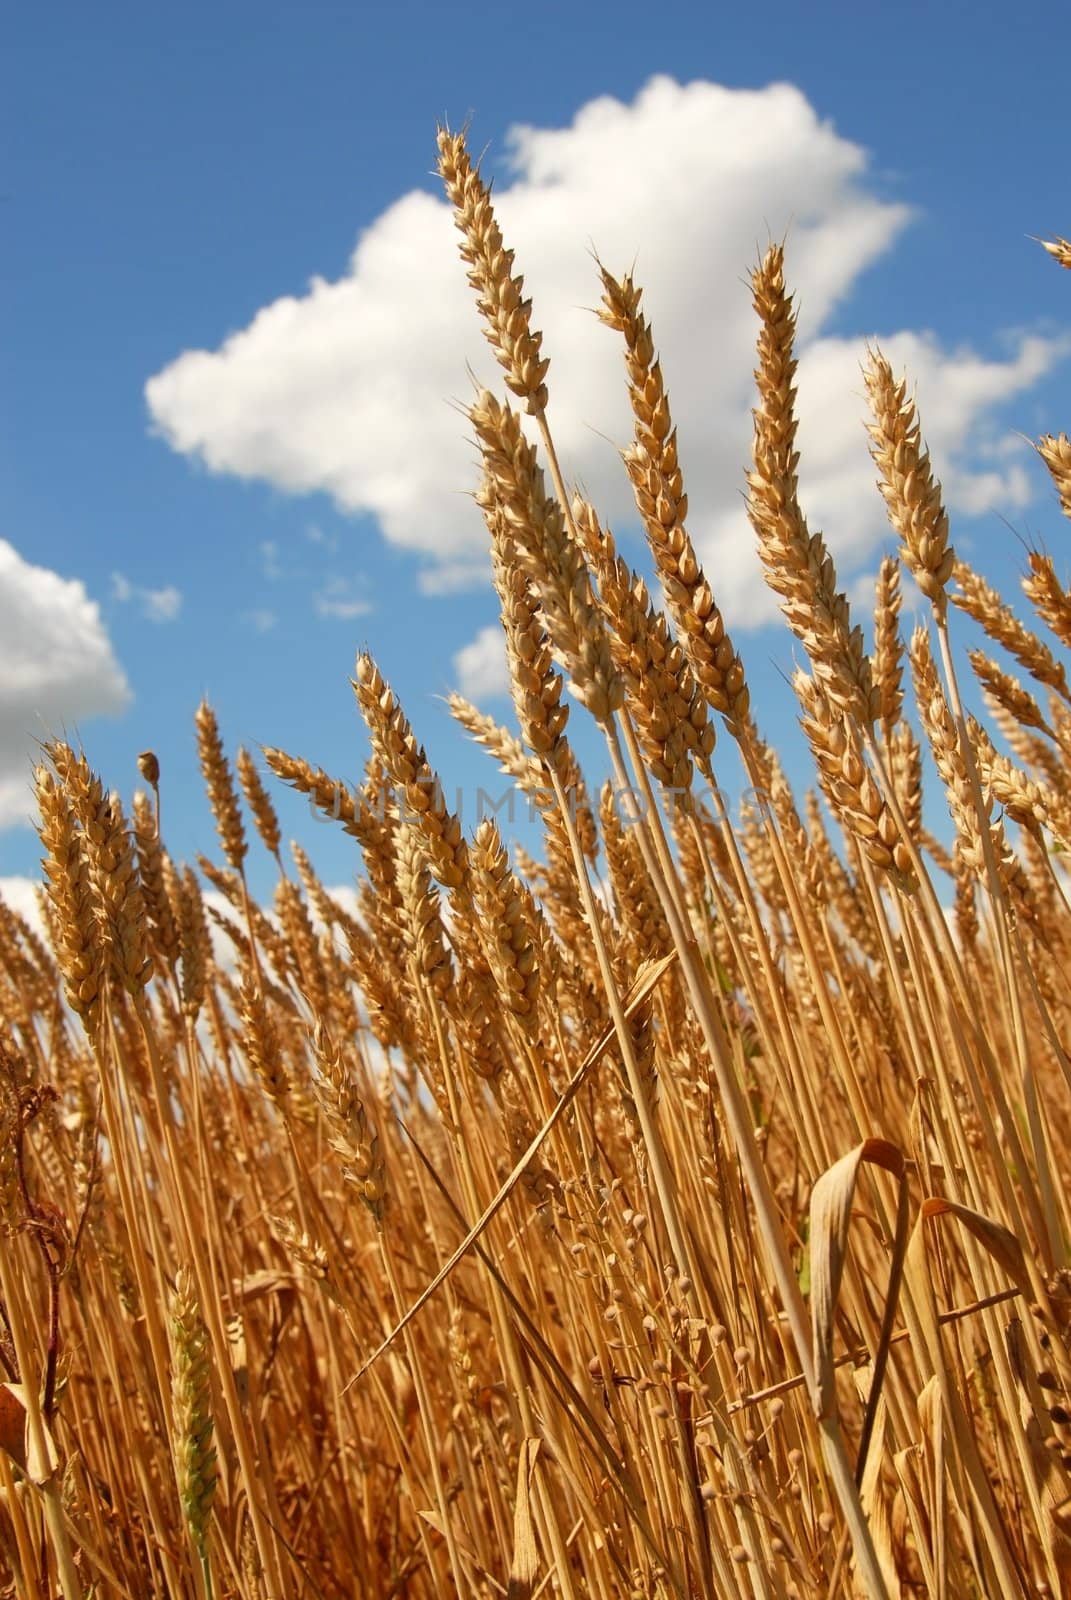 yellow wheat plant on field over scenic blue sky